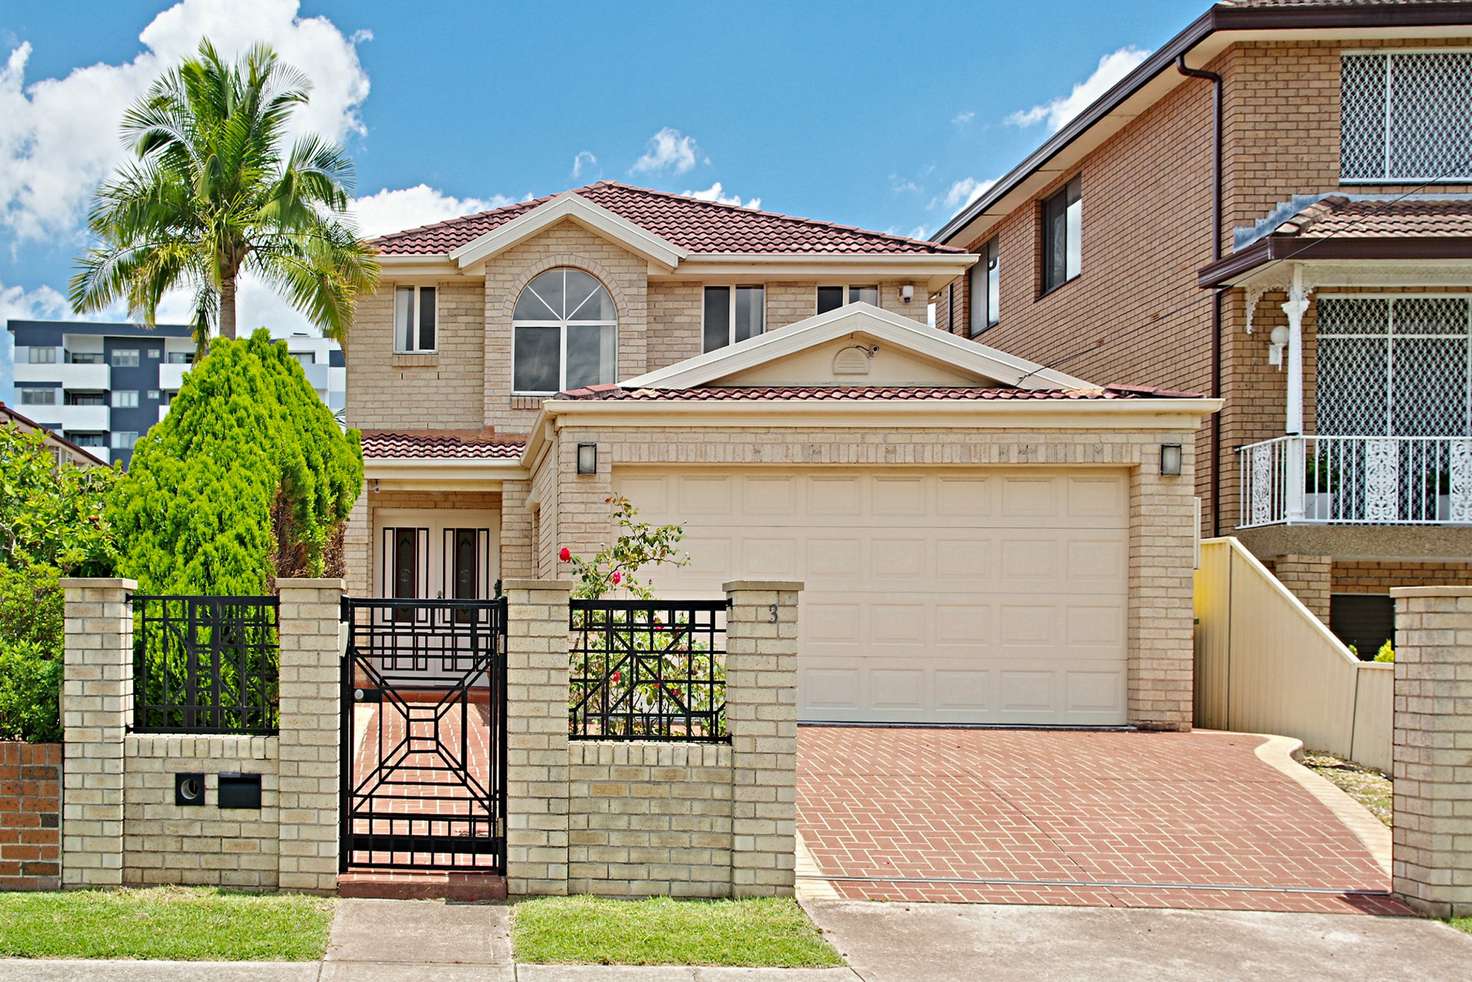 Main view of Homely house listing, 3 Percy, Bankstown NSW 2200